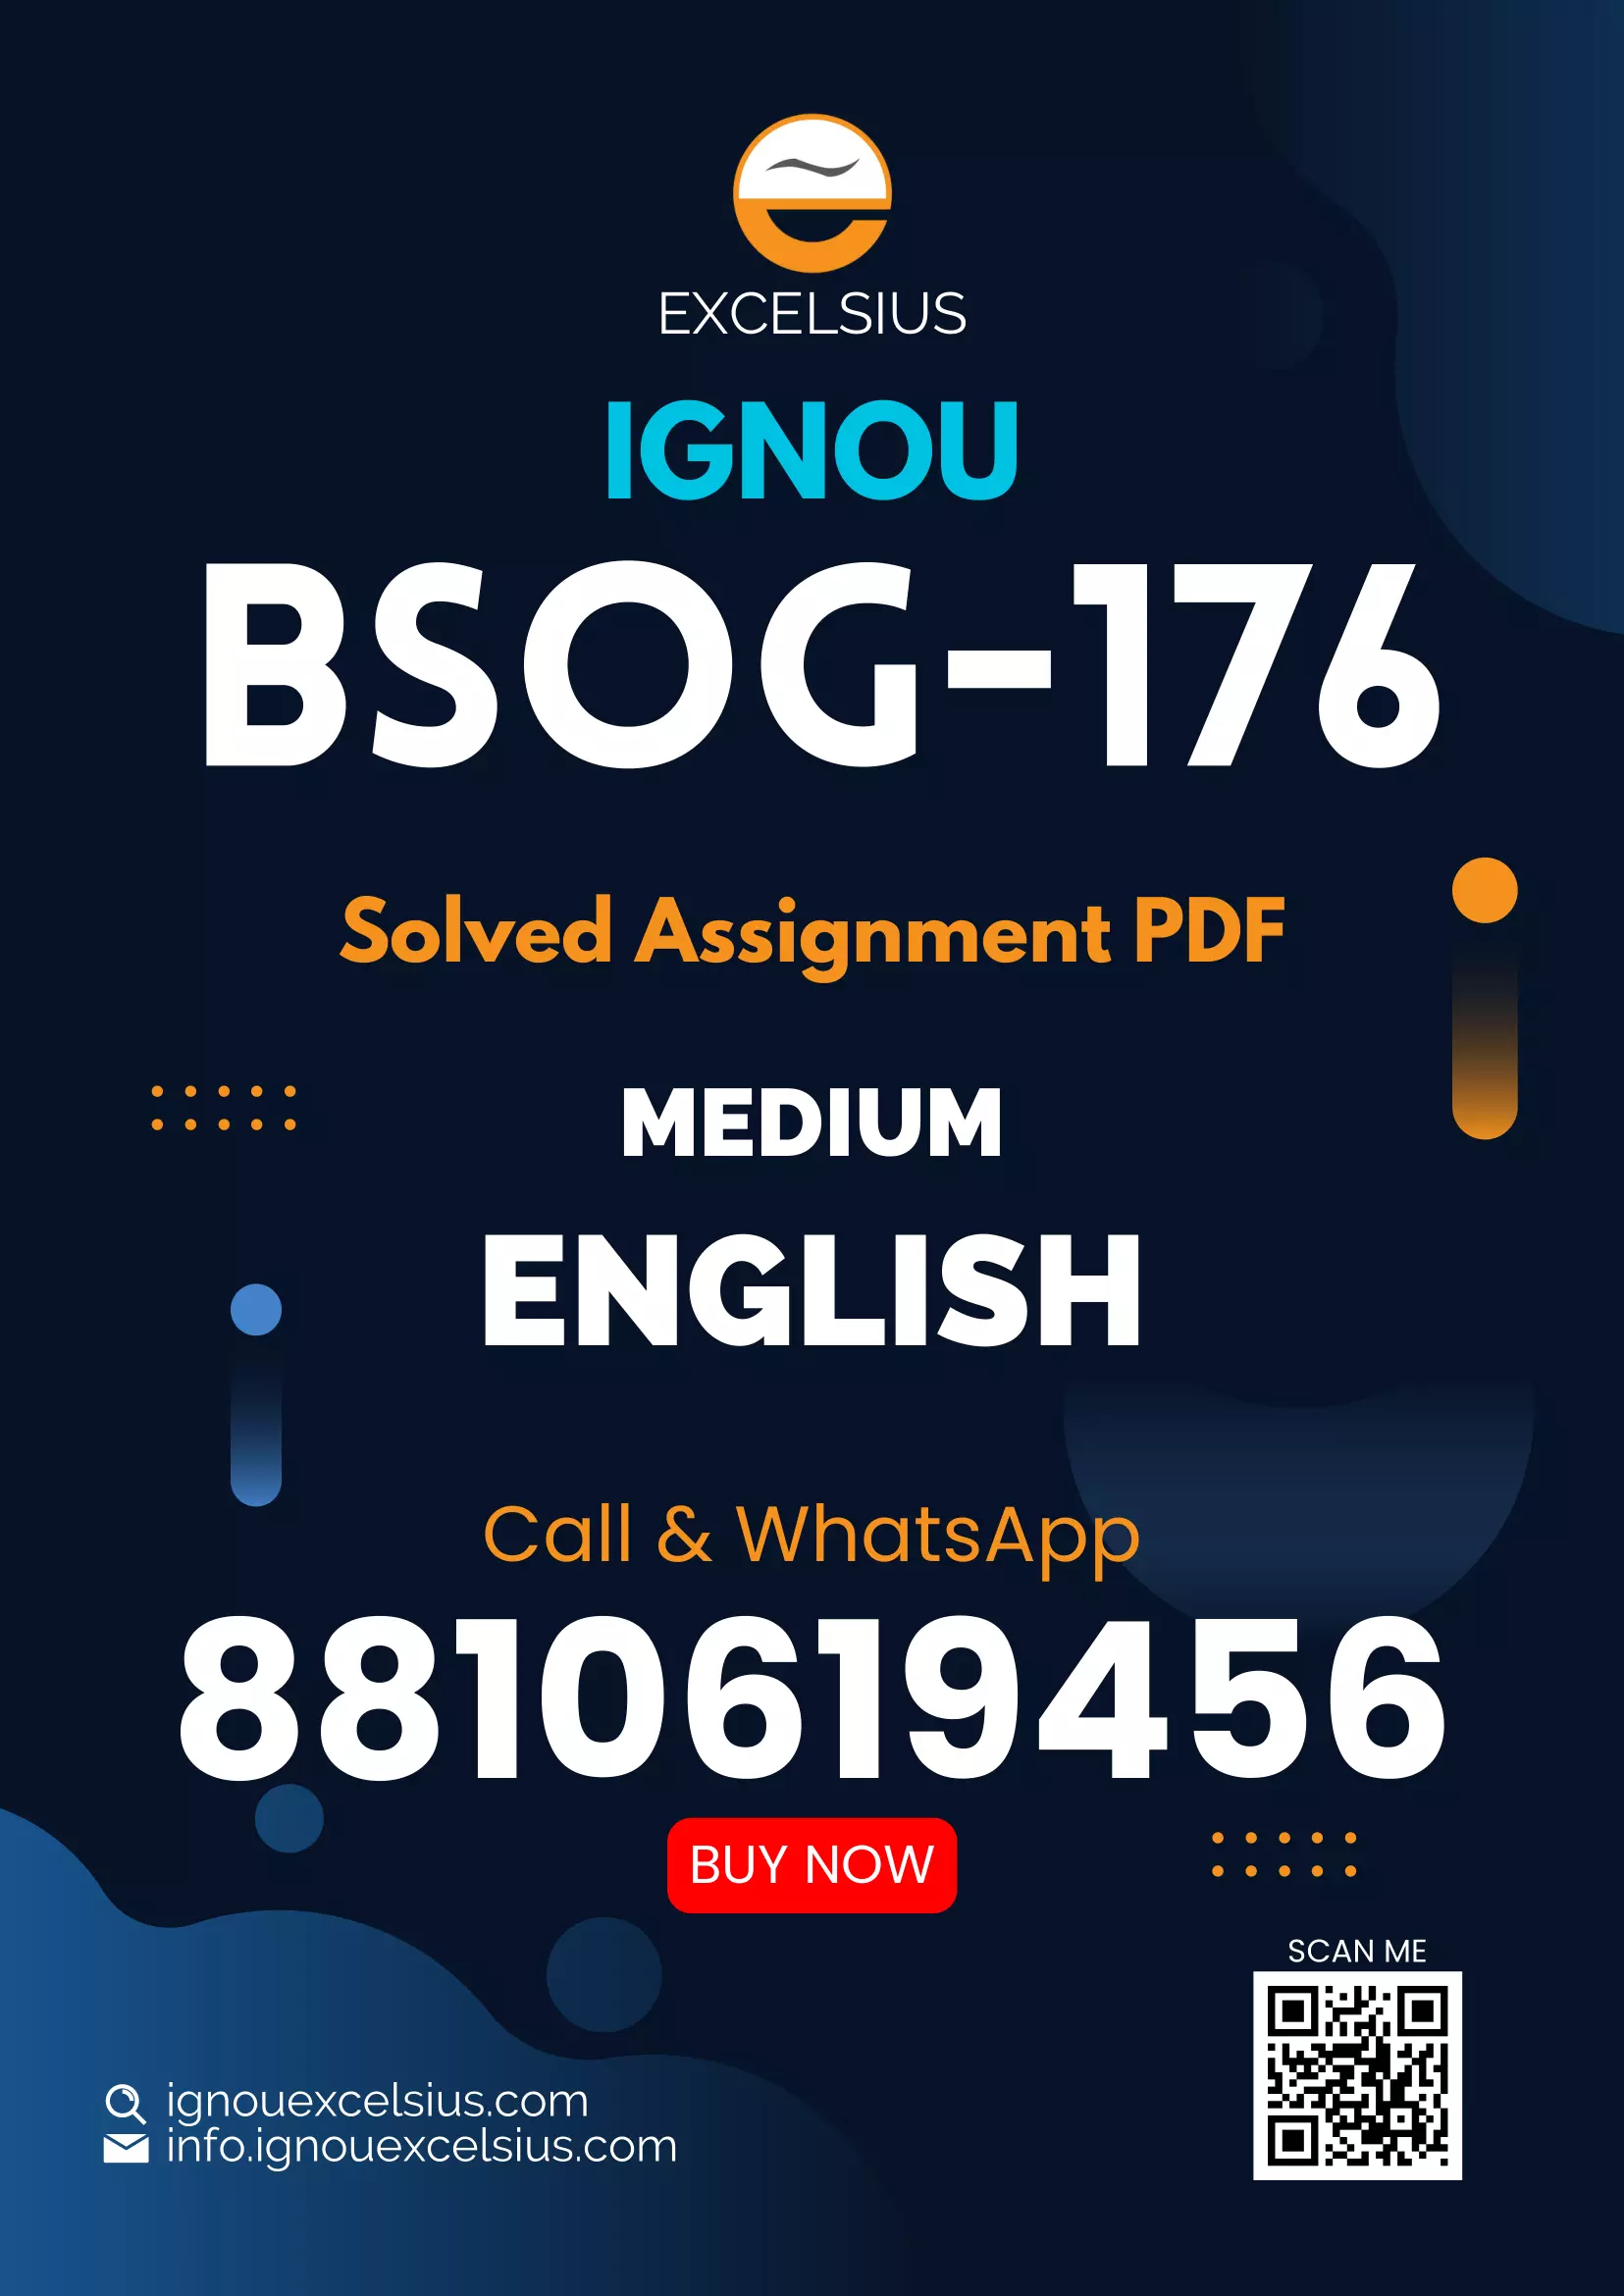 IGNOU BSOG-176 - Economy and Society, Latest Solved Assignment-July 2022 – January 2023